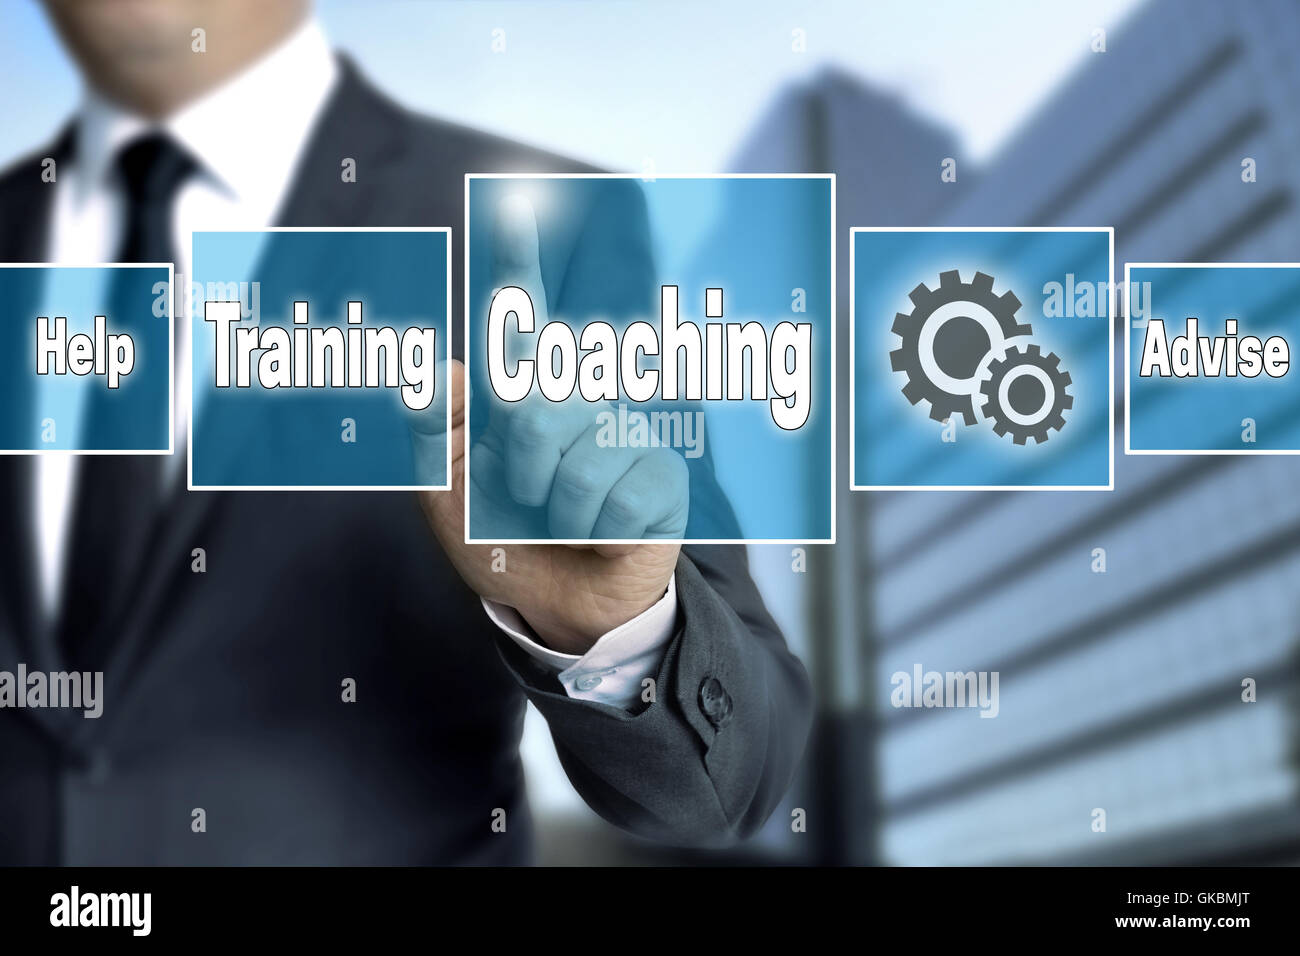 coaching touchscreen is operated by businessman. Stock Photo